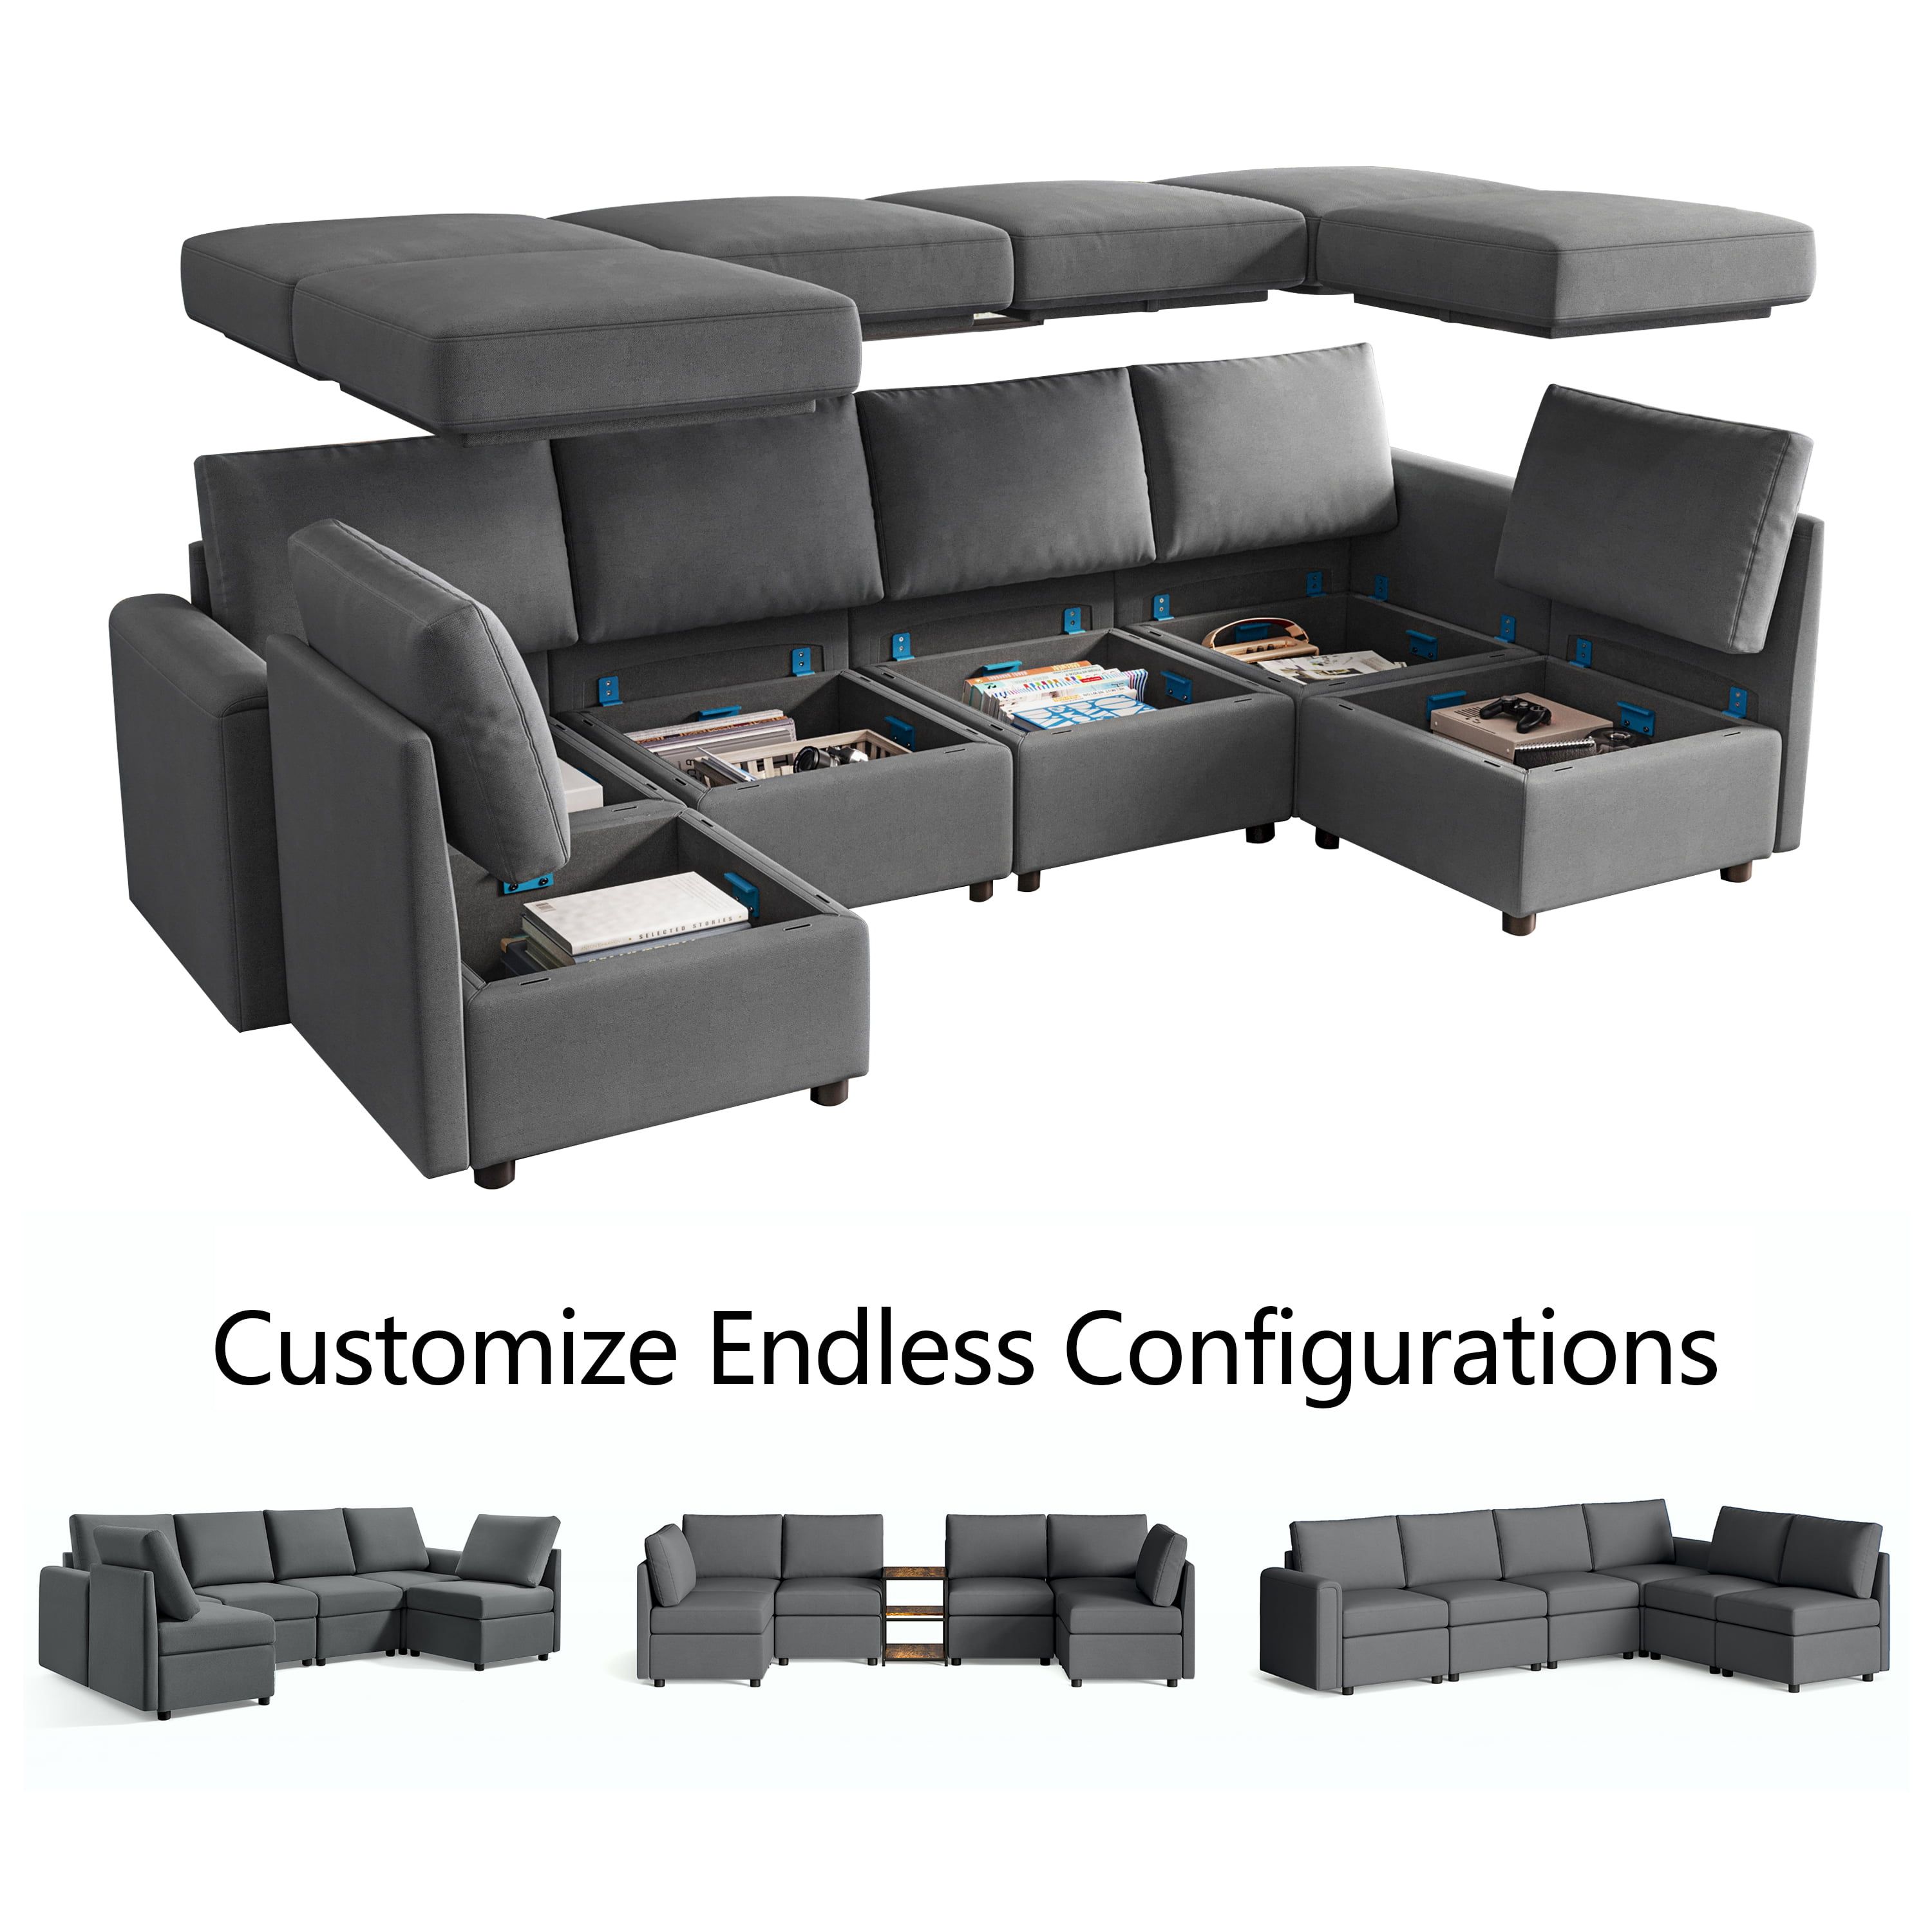 Linsy Home Modular Couches And Sofas Sectional With Storage Sectional Sofa  U Shaped Sectional Couch With Reversible Chaises, Dark Gray – Walmart With Regard To Sectional Sofa With Storage (Gallery 9 of 20)